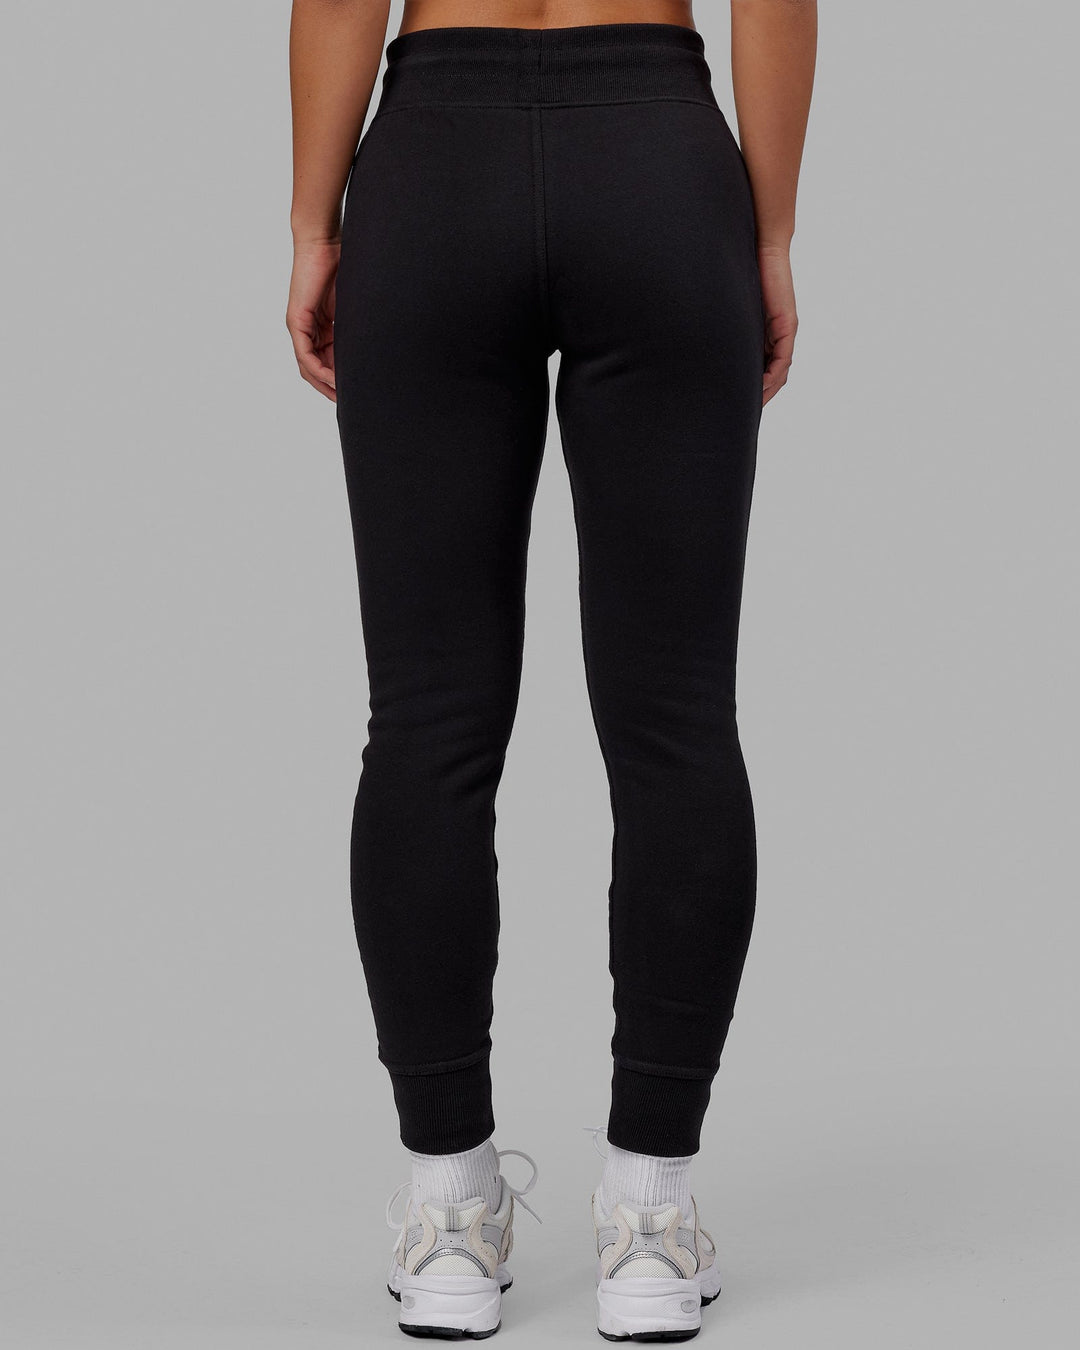 Woman wearing Unisex Structure Track Pant - Black-White